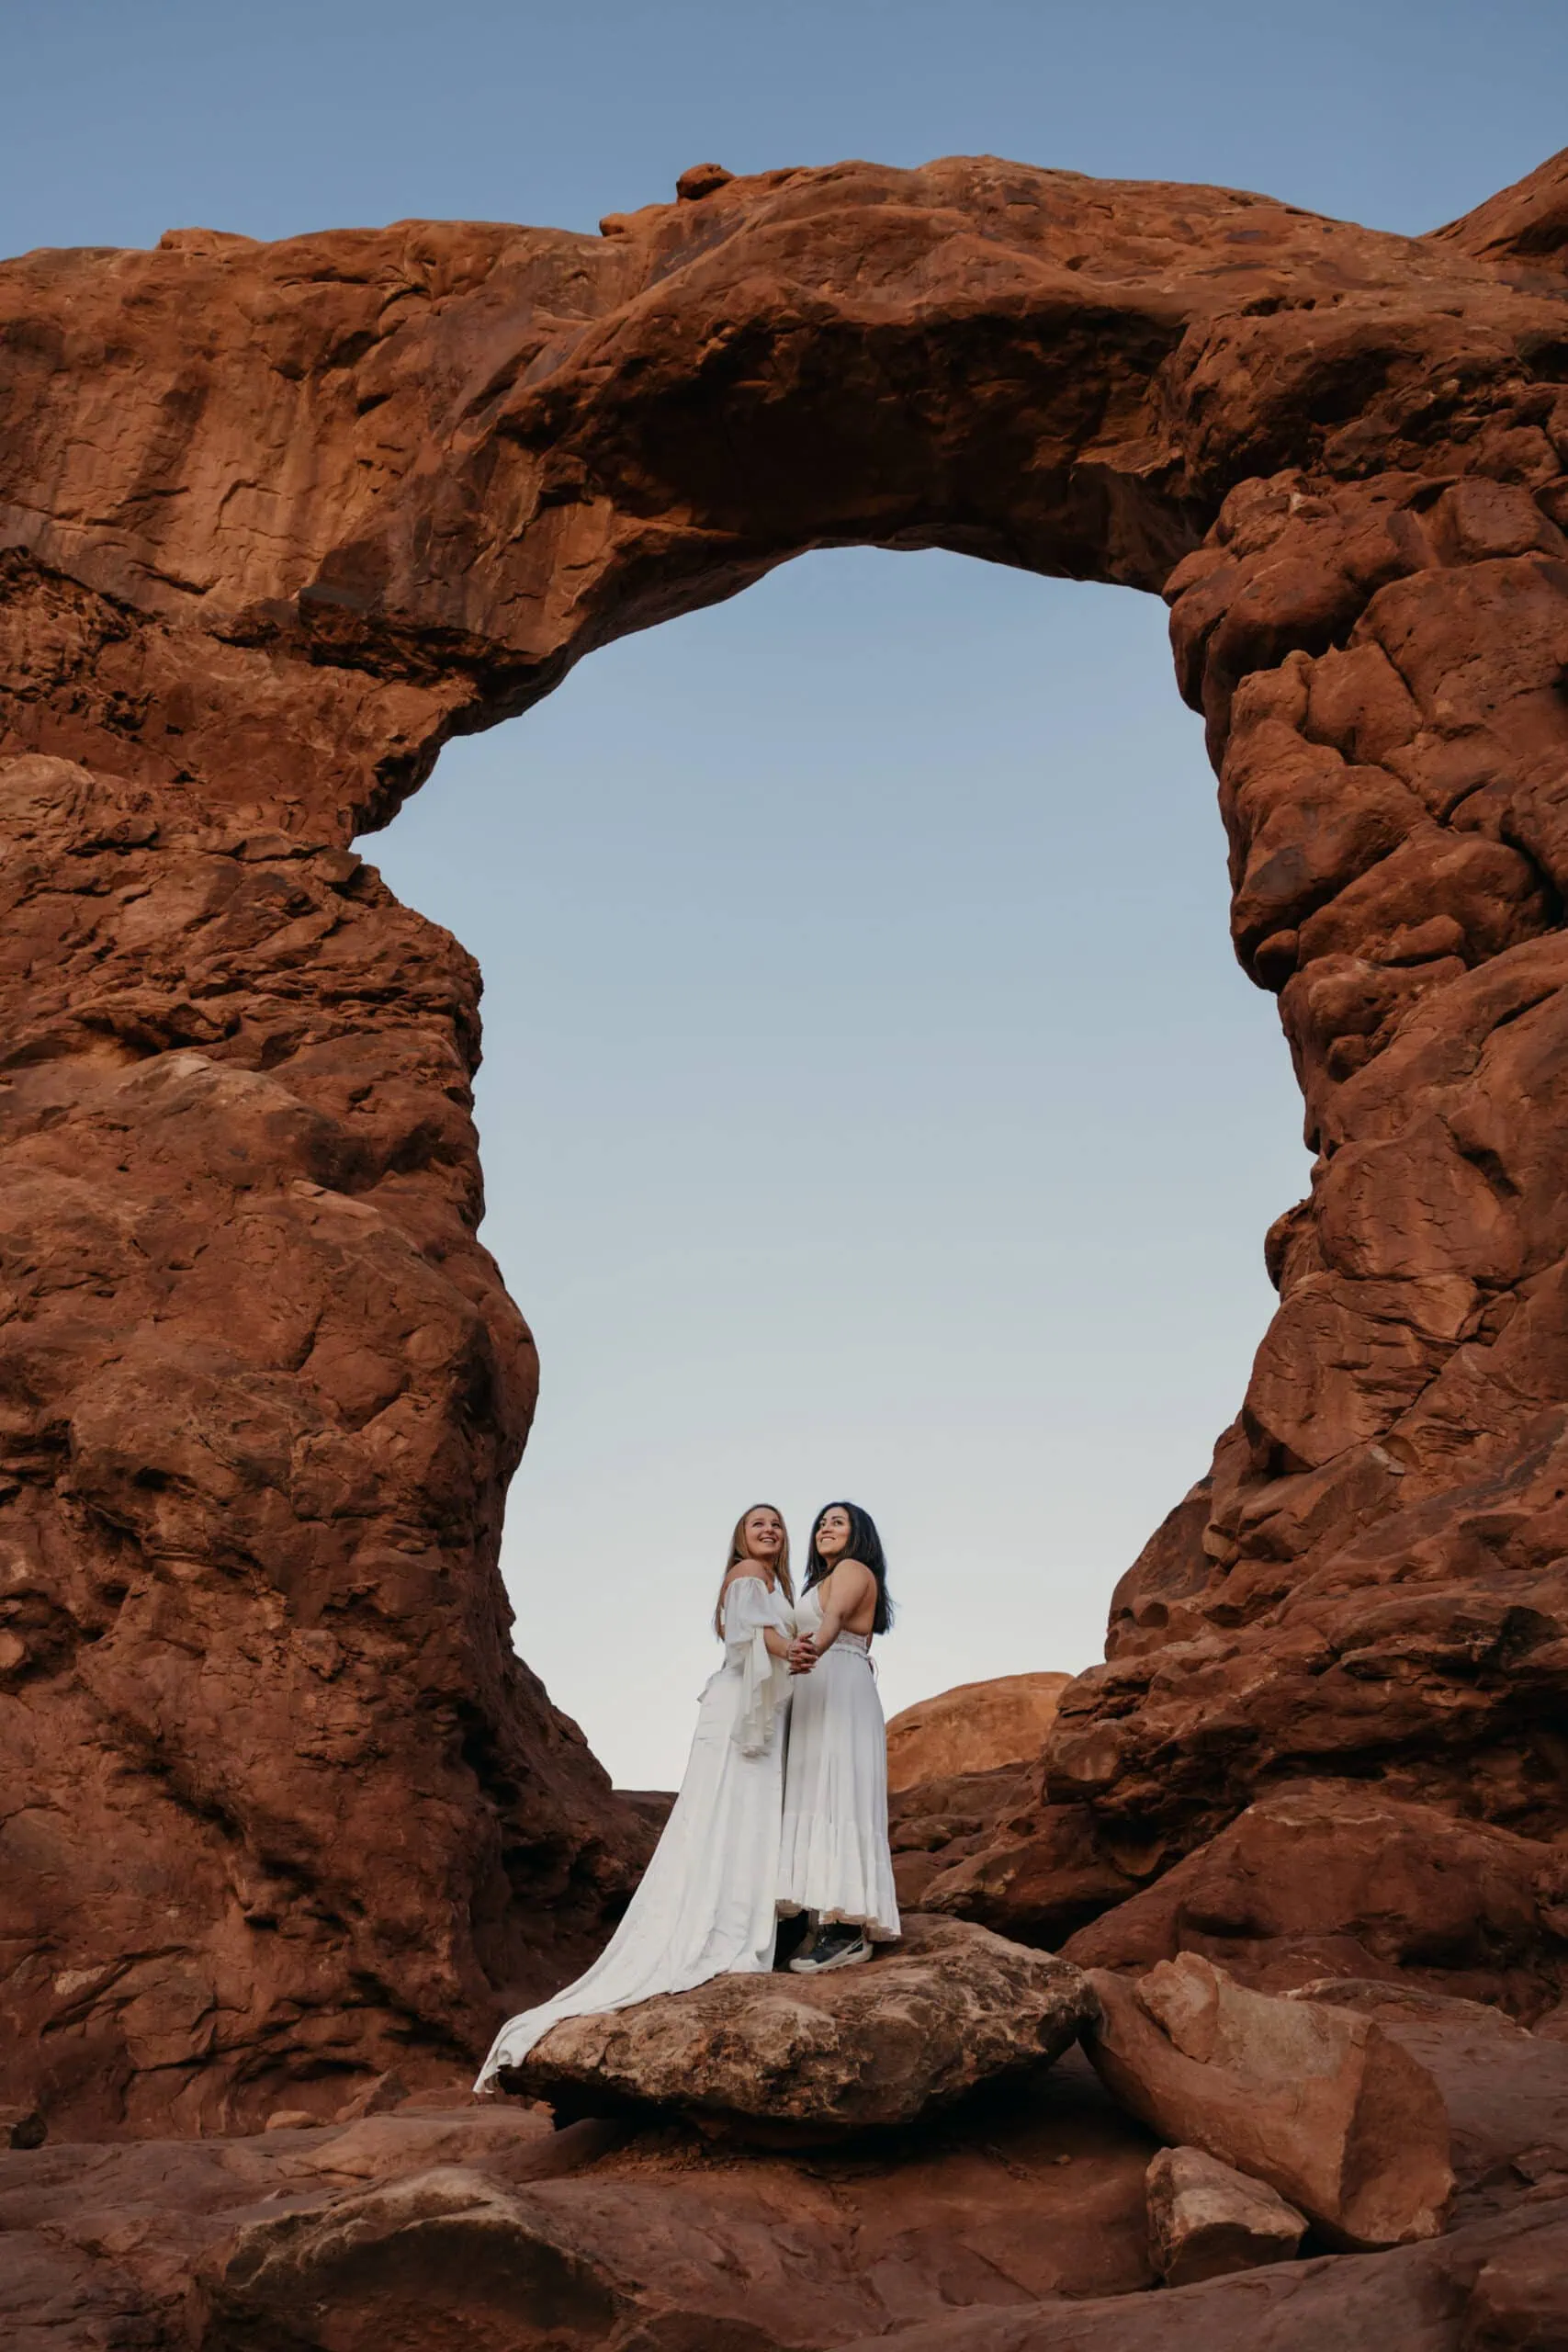 Two brides hold each other as they watch the sun peak above the horizon in Arches National Park.